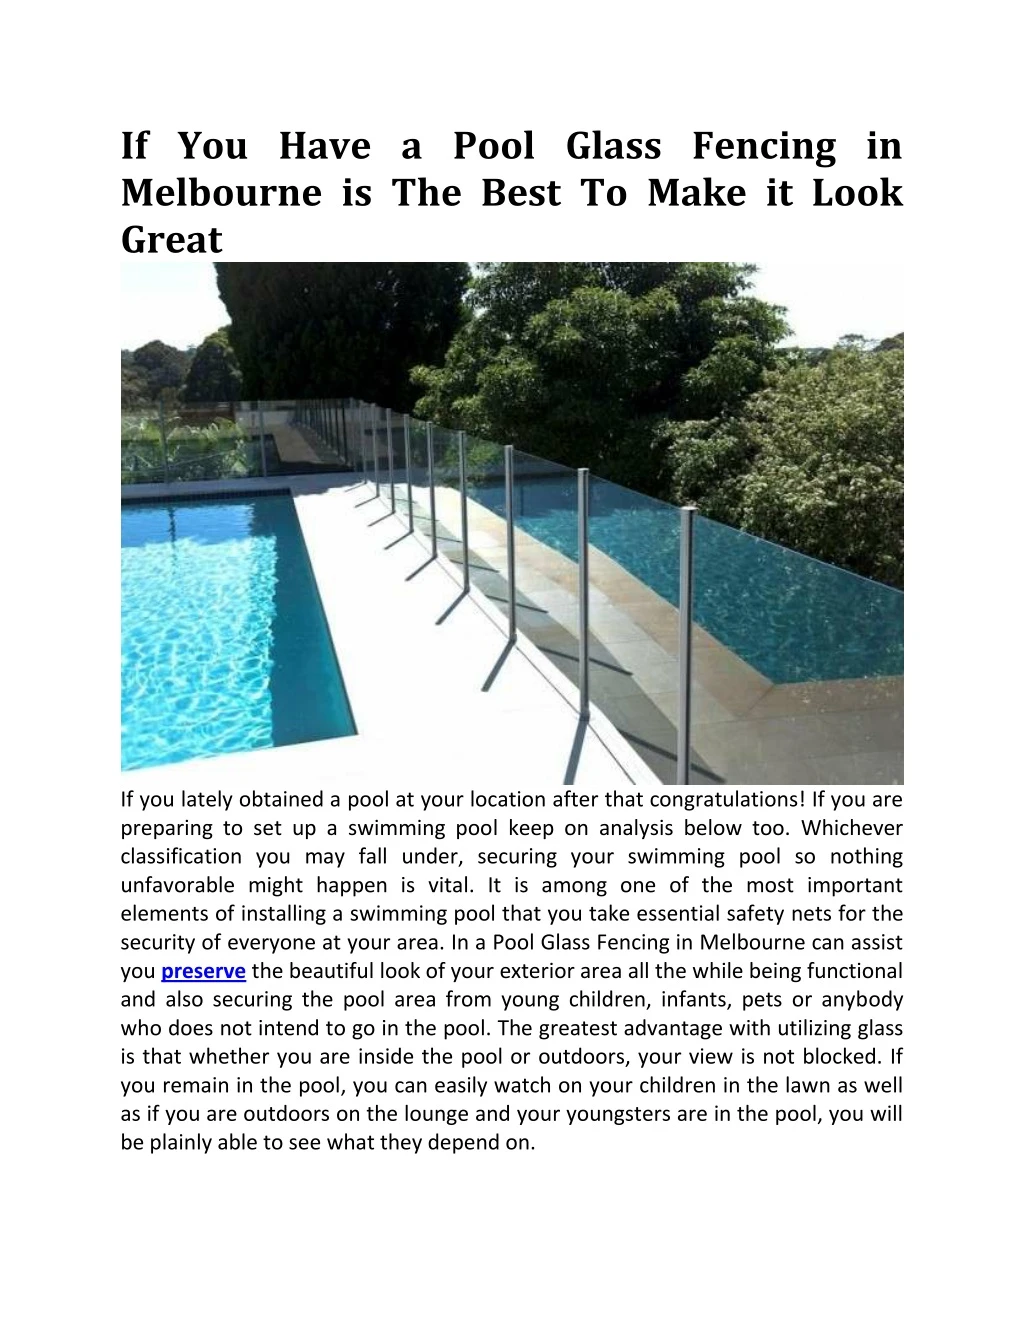 if you have a pool glass fencing in melbourne